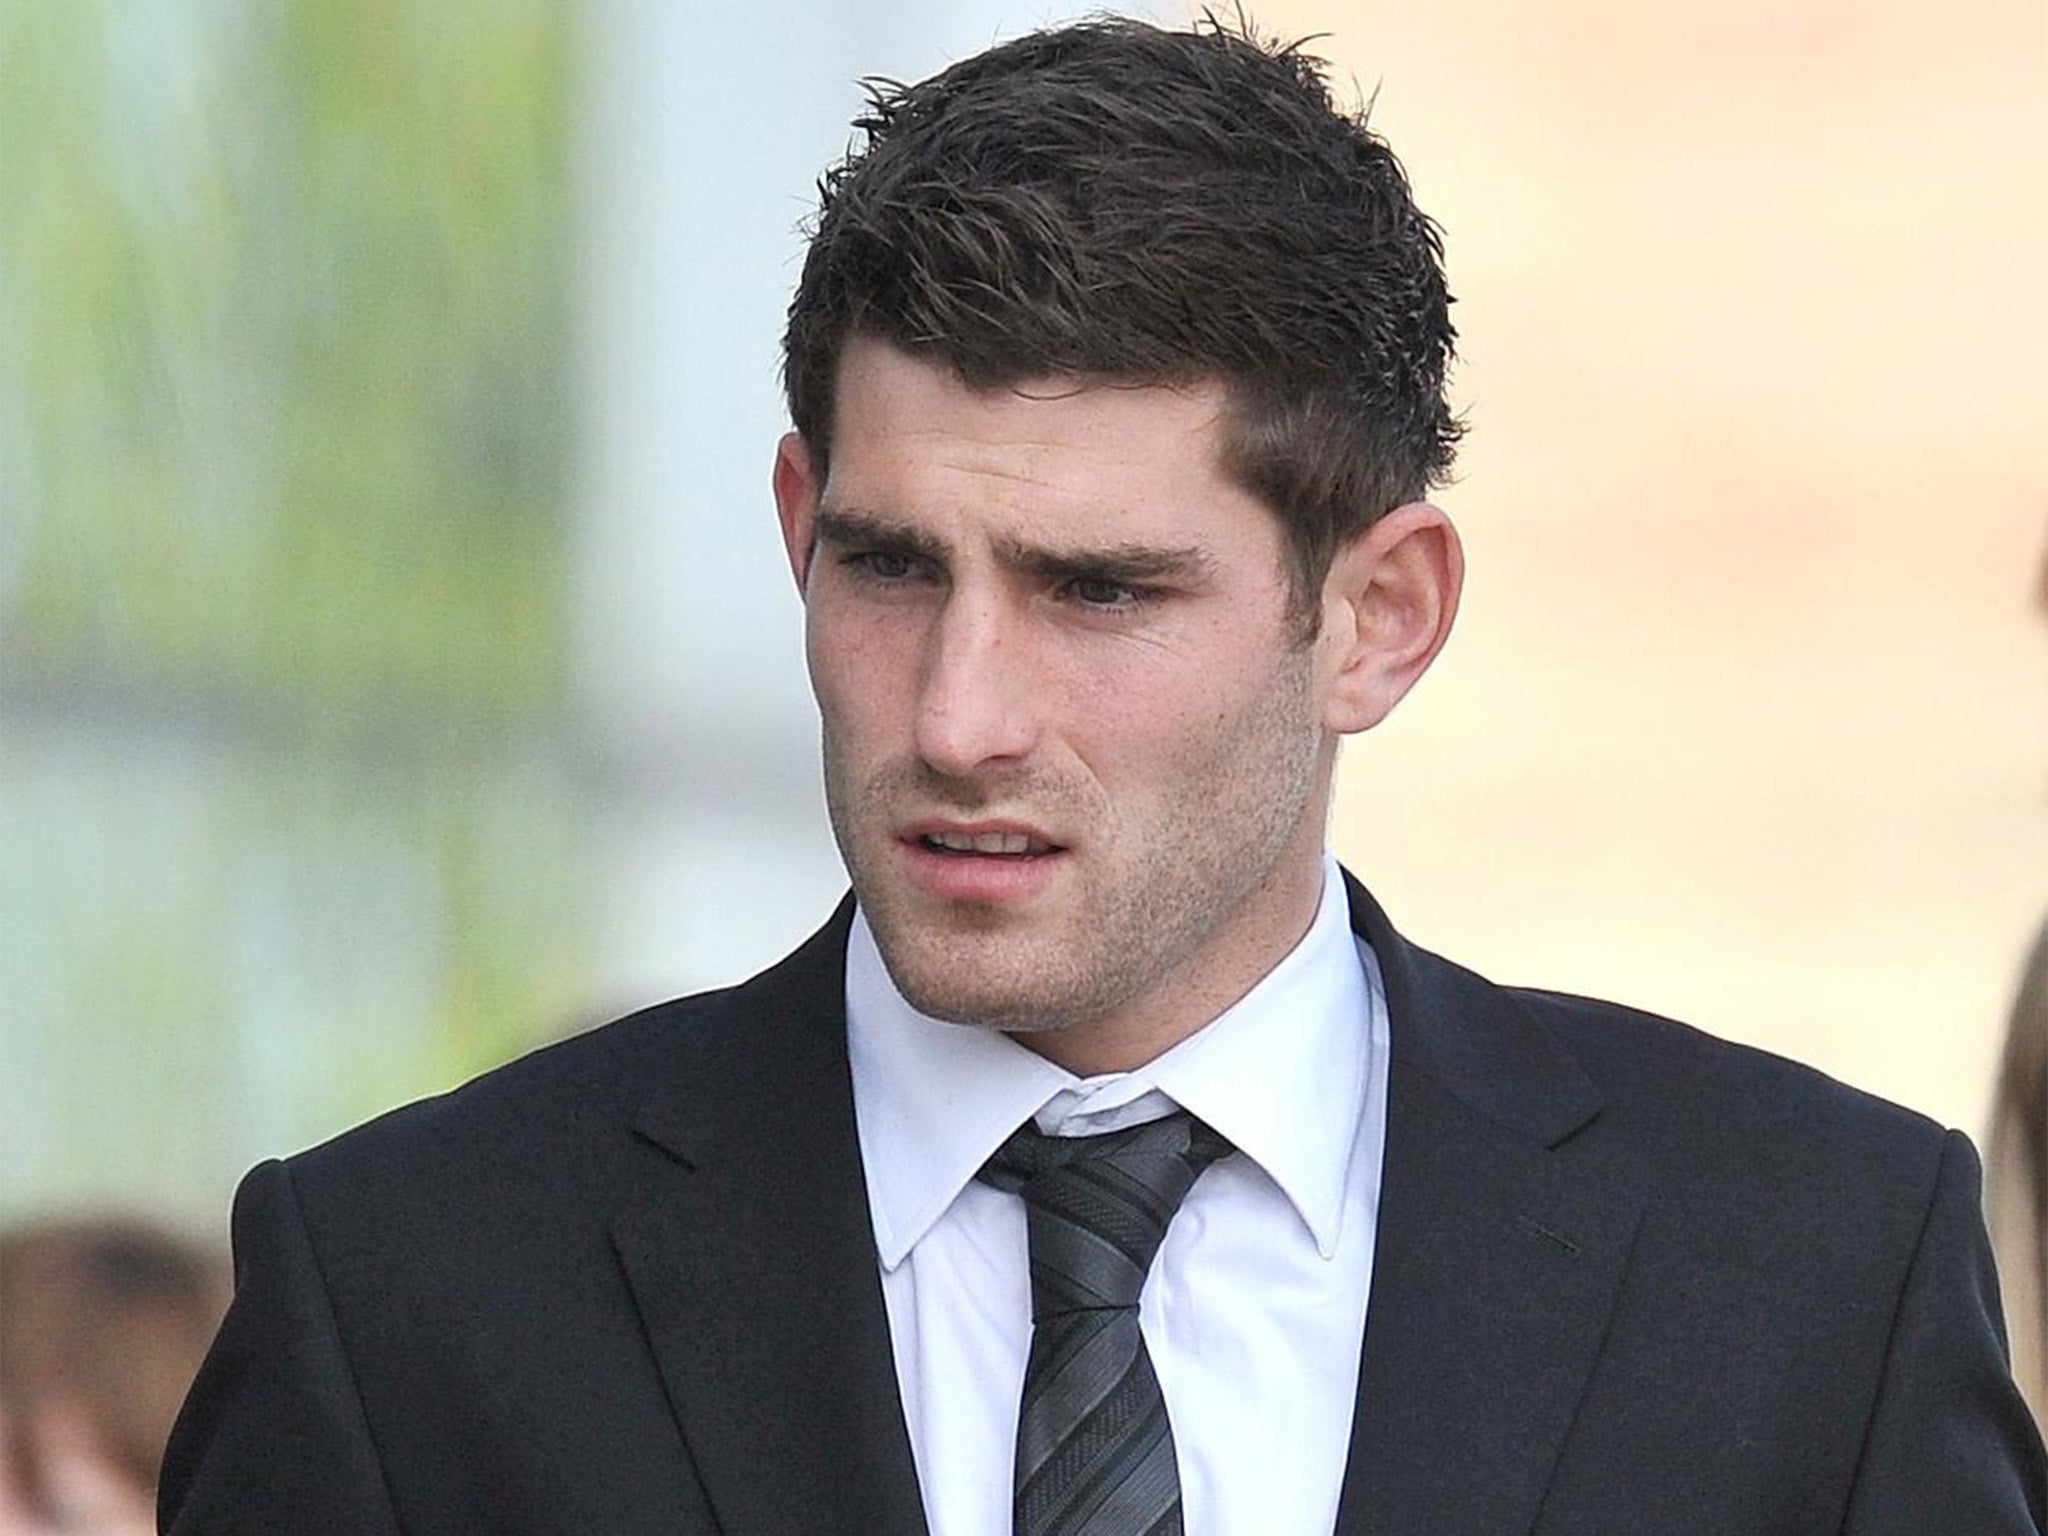 &#13;
Ched Evans' appeal case will be heard in 2016&#13;